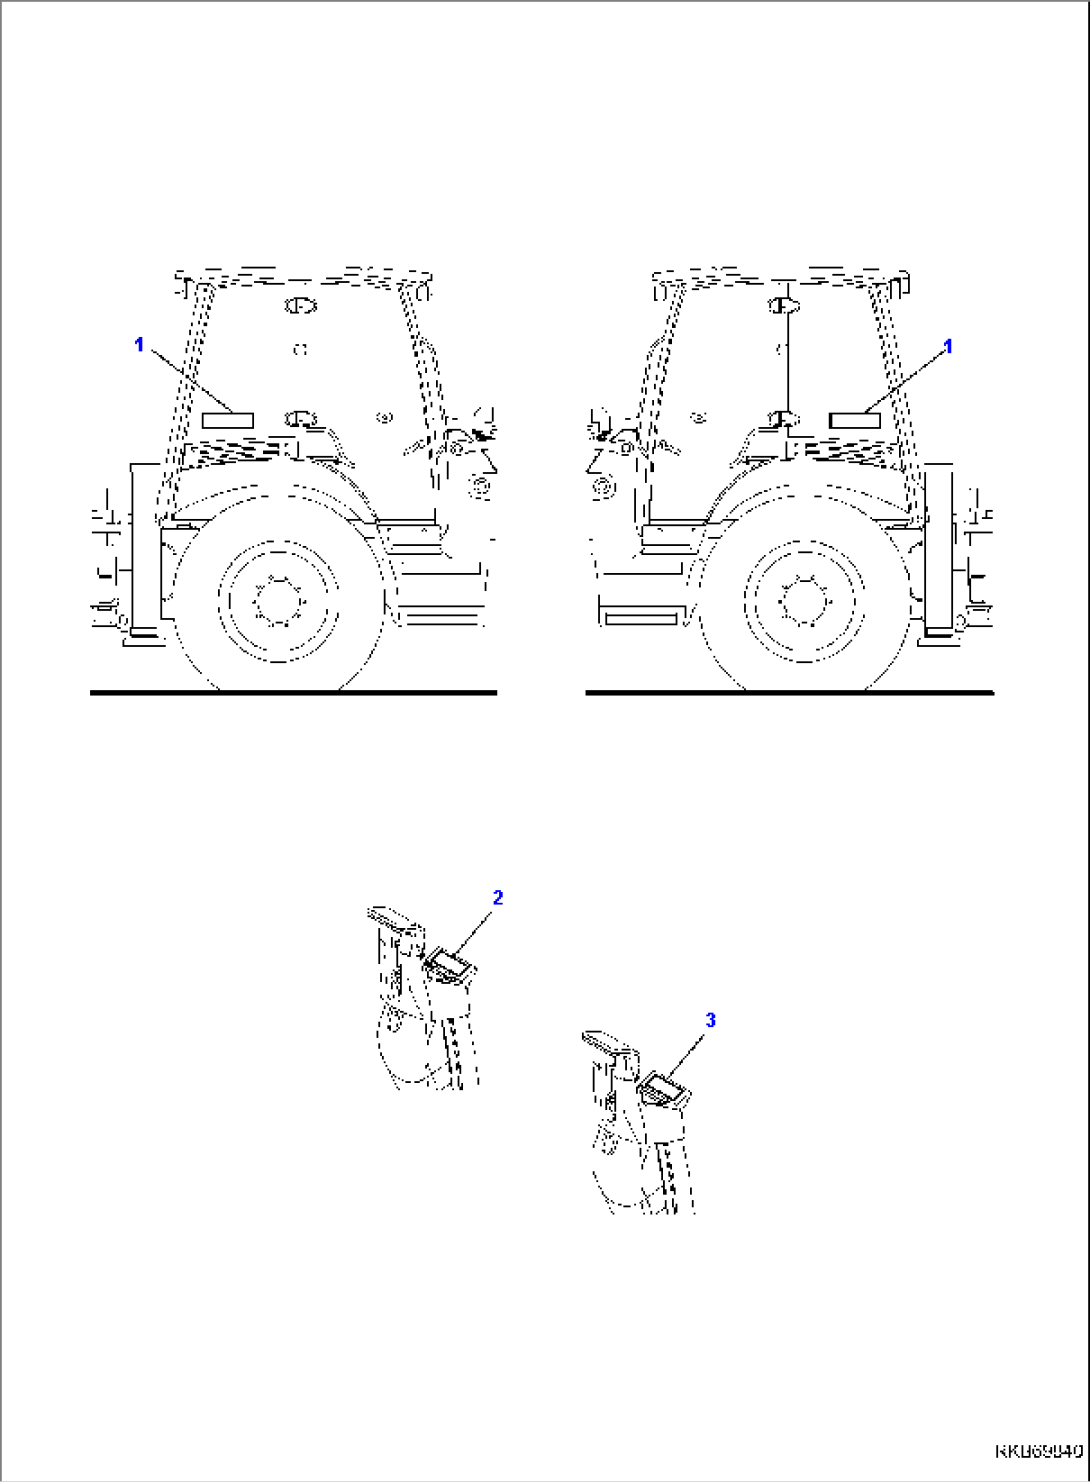 MARK PLATE (BACKHOE) (ISO SCHEMA) (WITH SIDE DIGGING BOOM) (WITH BACKHOE PPC)